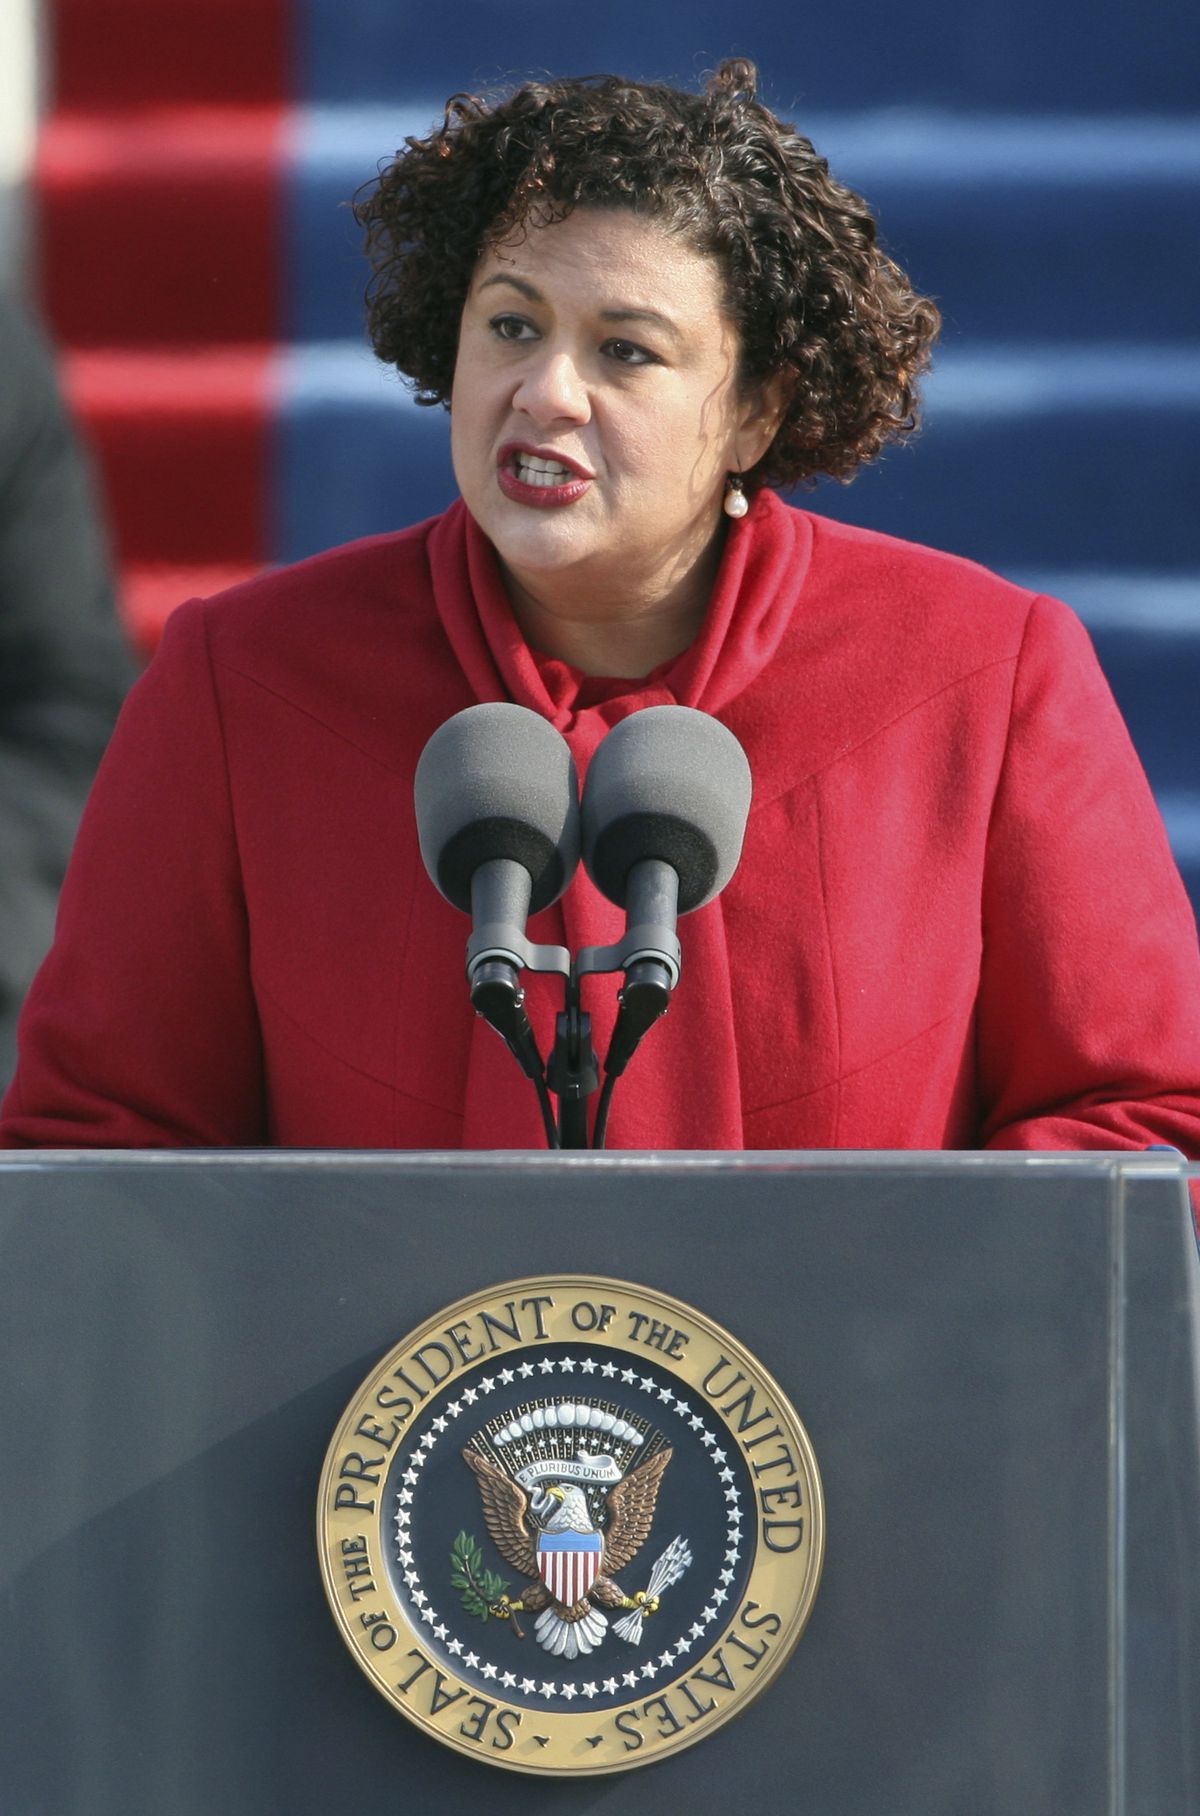 FILE - In this Jan. 20, 2009, file photo, Elizabeth Alexander recites a poem during swearing-in ceremonies at the Capitol in Washington. Alexander is the president of the Andrew W. Mellon Foundation, which announced Monday, Oct. 5, 2020, it is spending $250 million on a five-year effort called the "Monuments Project" to reimagine monuments in public spaces.  (Ron Edmonds)